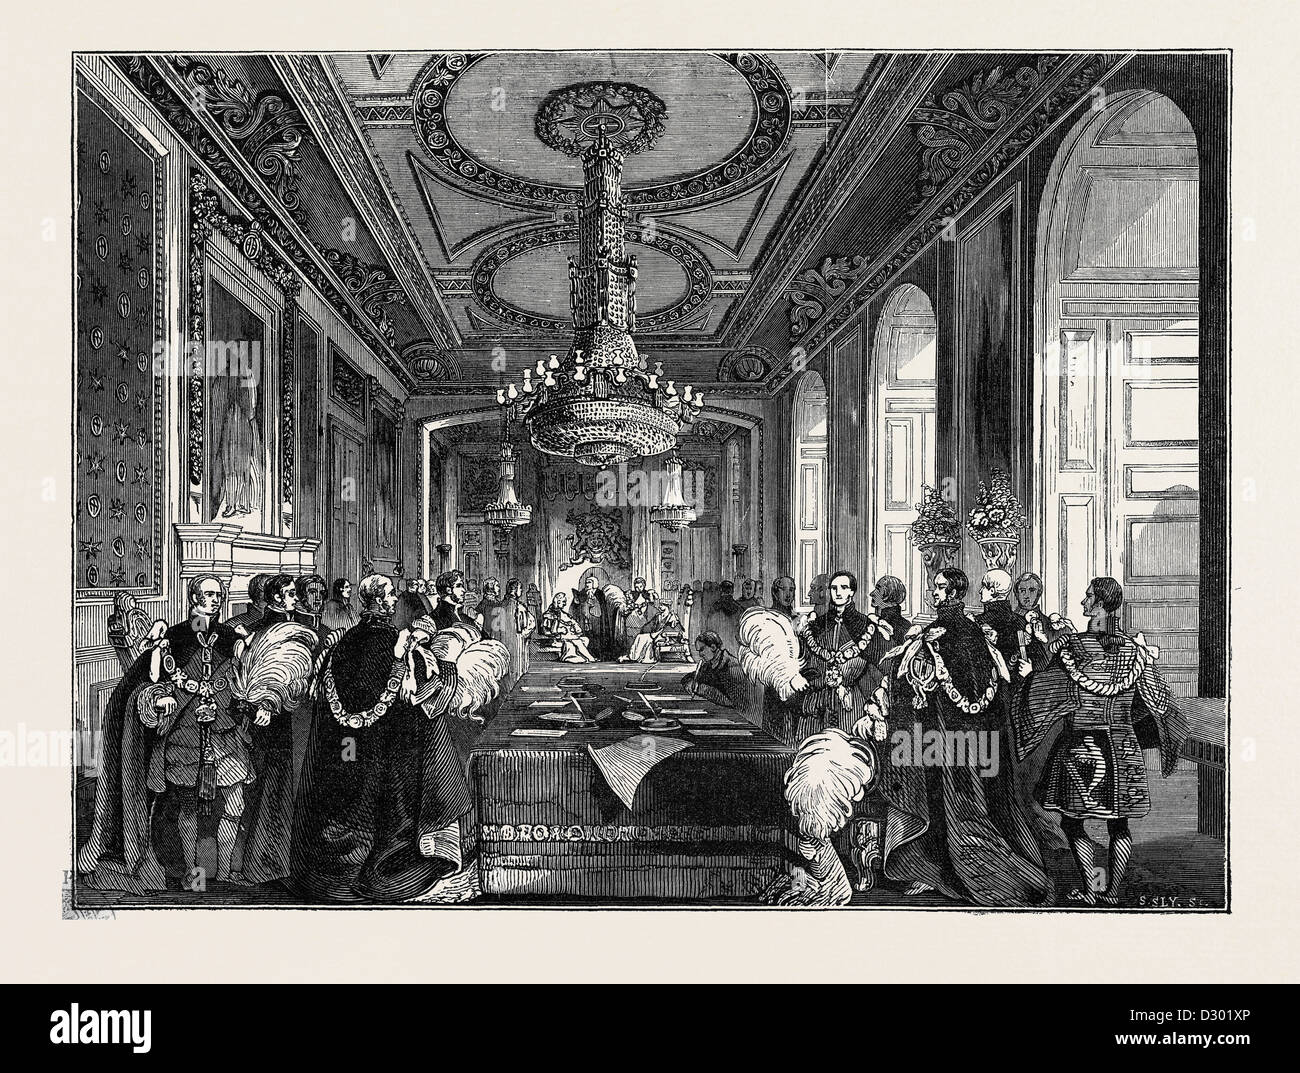 VISIT OF THE KING OF THE FRENCH TO QUEEN VICTORIA; CHAPTER OF THE Stock Photo: 53476606 - Alamy